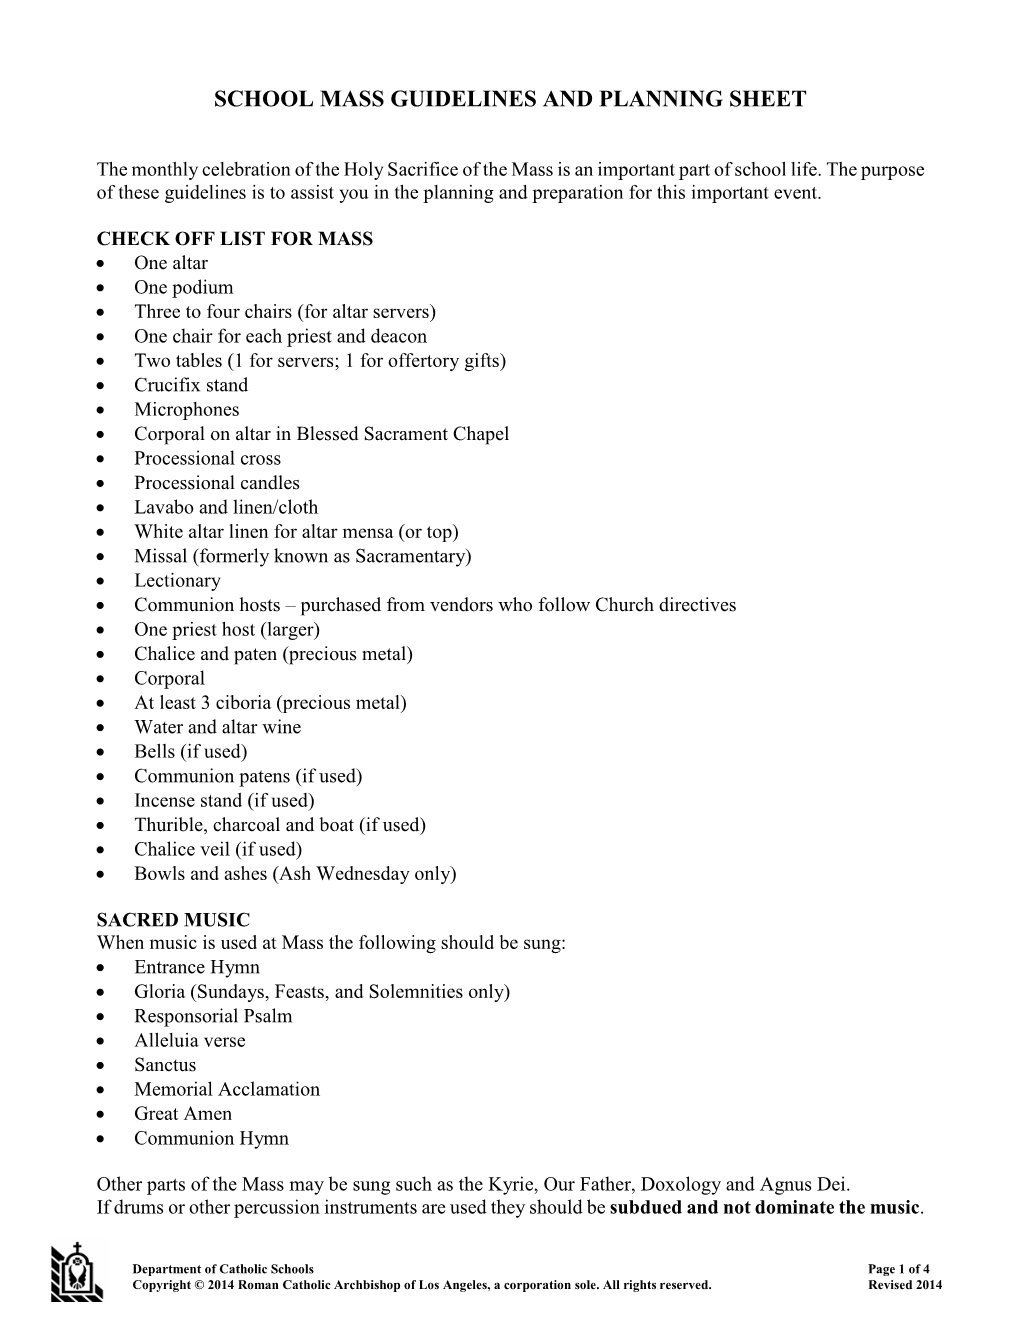 School Mass Guidelines and Planning Sheet